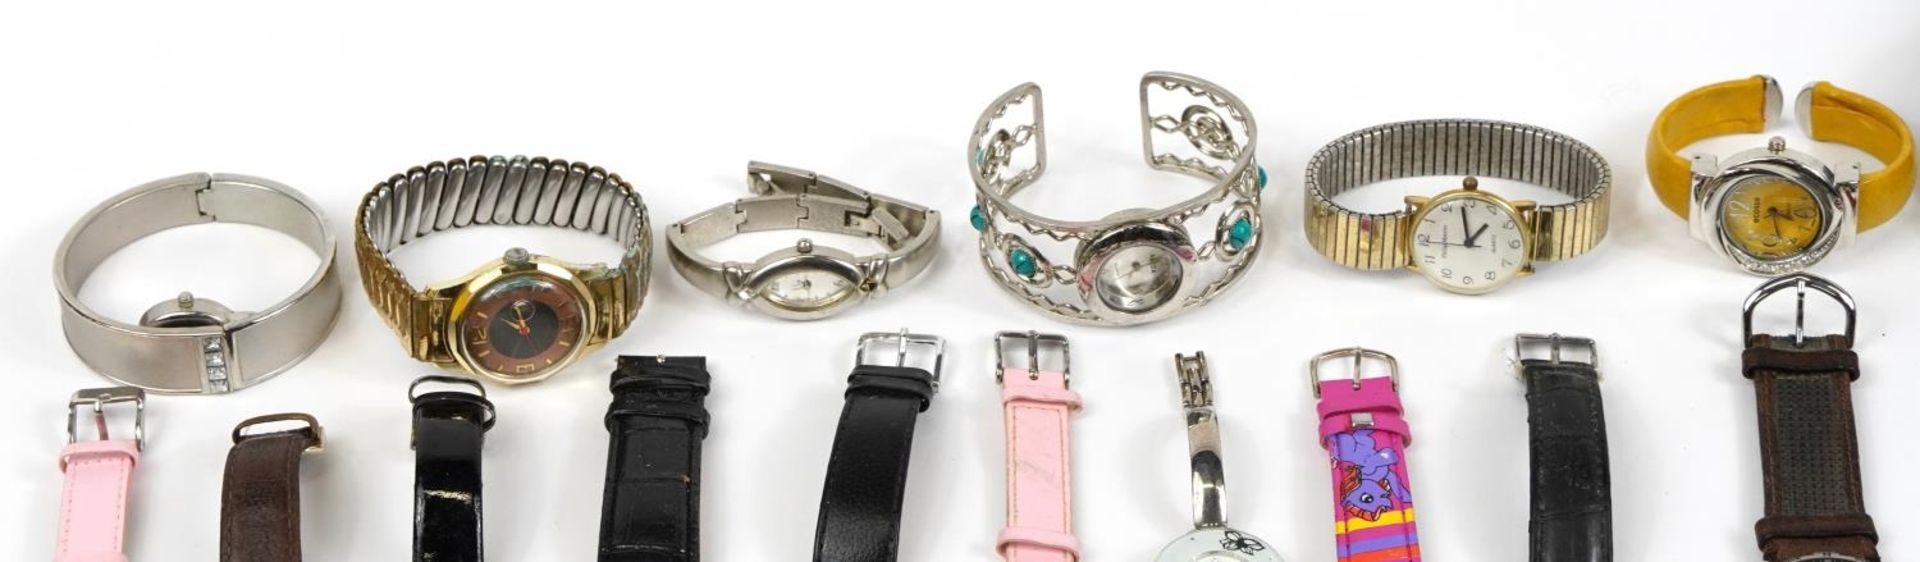 Vintage and later ladies and gentlemen's wristwatches including Casio, Seiko, Sekonda, Pulsar and - Image 2 of 6